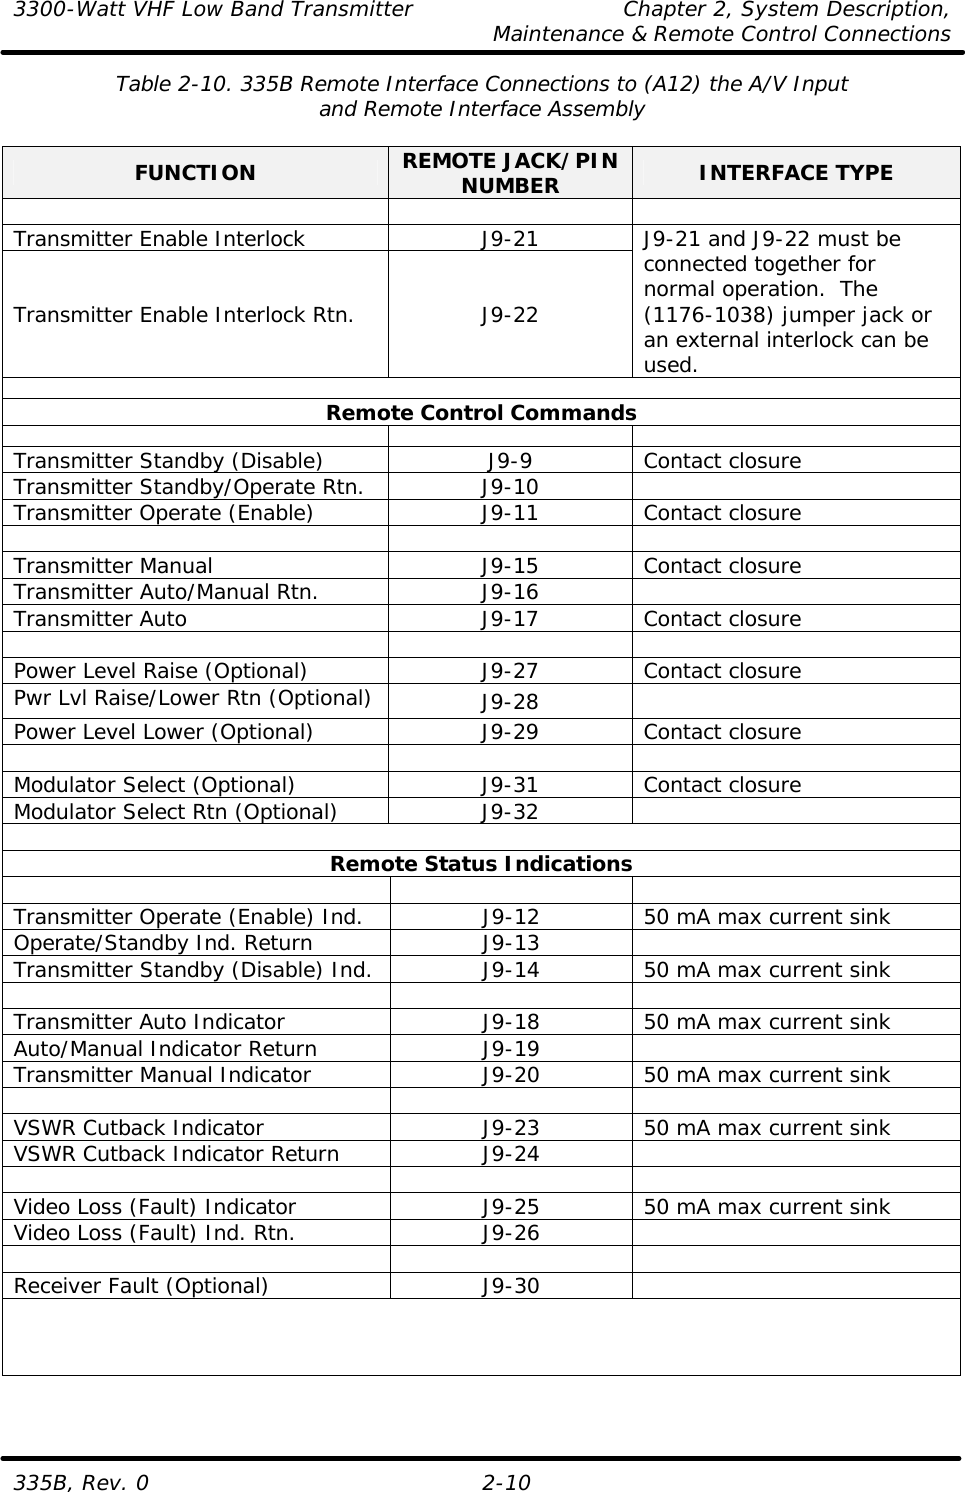 3300-Watt VHF Low Band Transmitter    Chapter 2, System Description,     Maintenance &amp; Remote Control Connections 335B, Rev. 0 2-10 Table 2-10. 335B Remote Interface Connections to (A12) the A/V Input and Remote Interface Assembly  FUNCTION REMOTE JACK/PIN NUMBER INTERFACE TYPE    Transmitter Enable Interlock J9-21 Transmitter Enable Interlock Rtn. J9-22 J9-21 and J9-22 must be connected together for normal operation.  The (1176-1038) jumper jack or an external interlock can be used.  Remote Control Commands      Transmitter Standby (Disable) J9-9 Contact closure Transmitter Standby/Operate Rtn. J9-10   Transmitter Operate (Enable) J9-11 Contact closure      Transmitter Manual J9-15 Contact closure Transmitter Auto/Manual Rtn. J9-16   Transmitter Auto J9-17 Contact closure      Power Level Raise (Optional) J9-27 Contact closure Pwr Lvl Raise/Lower Rtn (Optional) J9-28  Power Level Lower (Optional) J9-29 Contact closure      Modulator Select (Optional) J9-31 Contact closure Modulator Select Rtn (Optional) J9-32    Remote Status Indications      Transmitter Operate (Enable) Ind. J9-12 50 mA max current sink Operate/Standby Ind. Return J9-13   Transmitter Standby (Disable) Ind. J9-14 50 mA max current sink      Transmitter Auto Indicator J9-18 50 mA max current sink Auto/Manual Indicator Return J9-19   Transmitter Manual Indicator J9-20 50 mA max current sink      VSWR Cutback Indicator J9-23 50 mA max current sink VSWR Cutback Indicator Return J9-24        Video Loss (Fault) Indicator J9-25 50 mA max current sink Video Loss (Fault) Ind. Rtn. J9-26        Receiver Fault (Optional) J9-30      